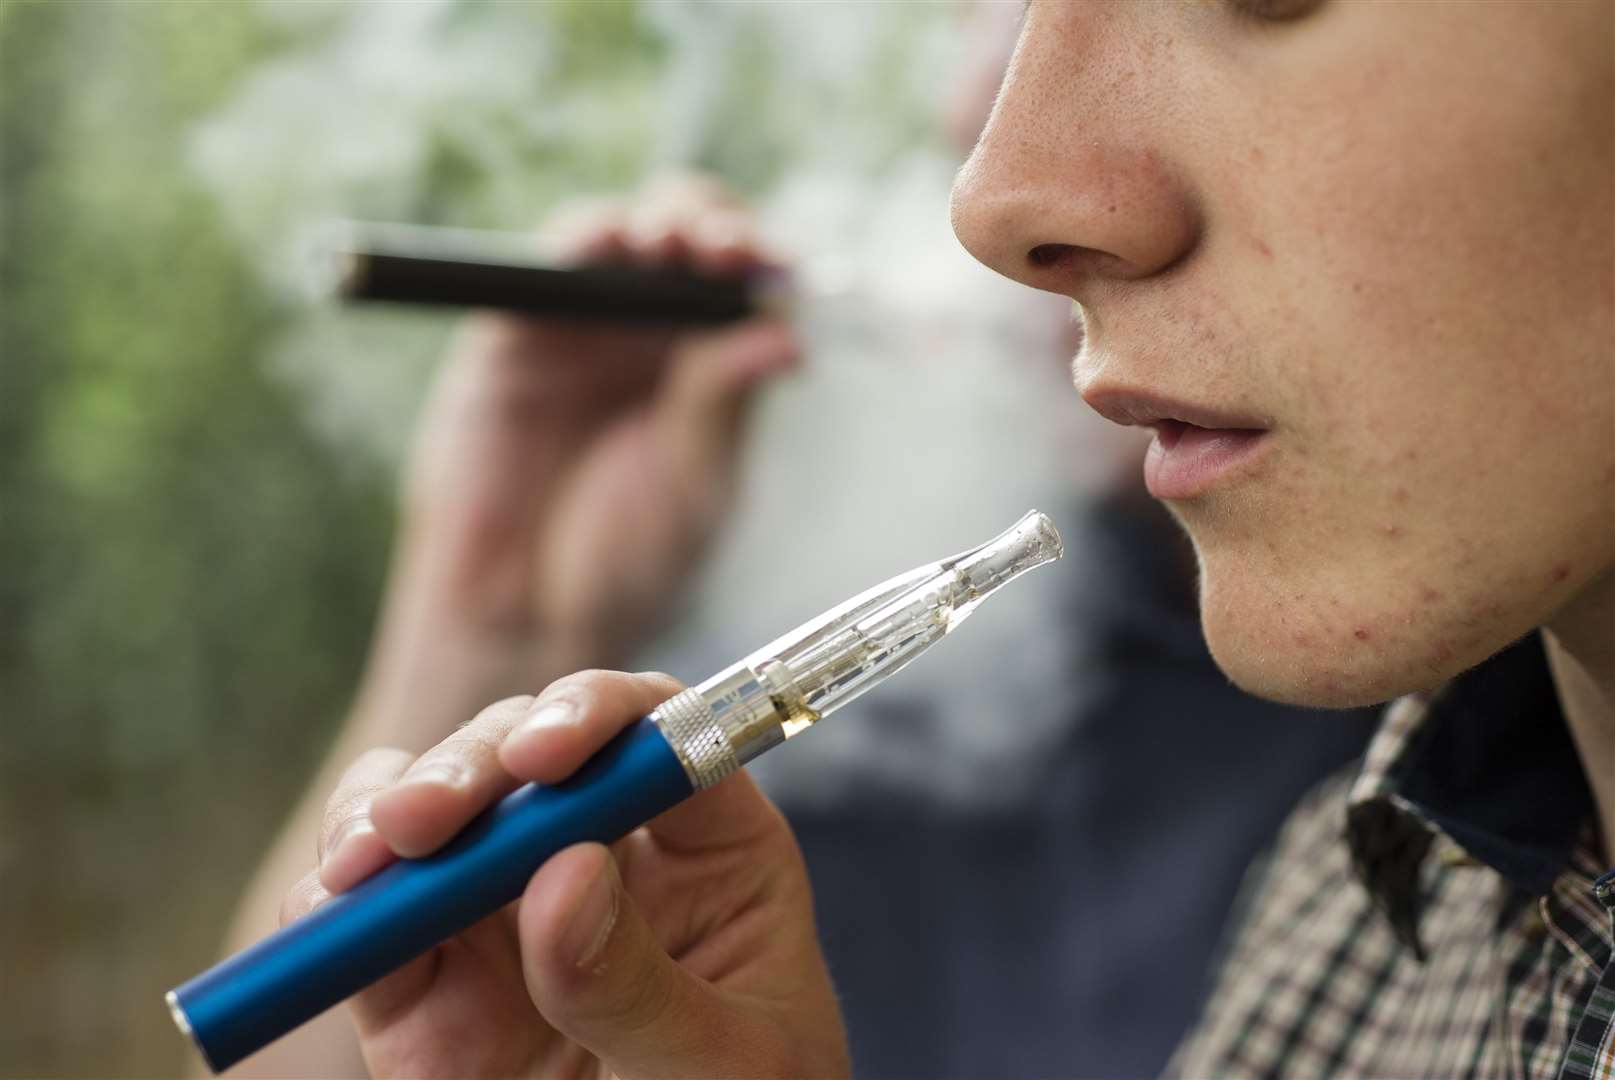 The NHS says vaping is a helpful tool for those trying to give up smoking. Image: iStock.